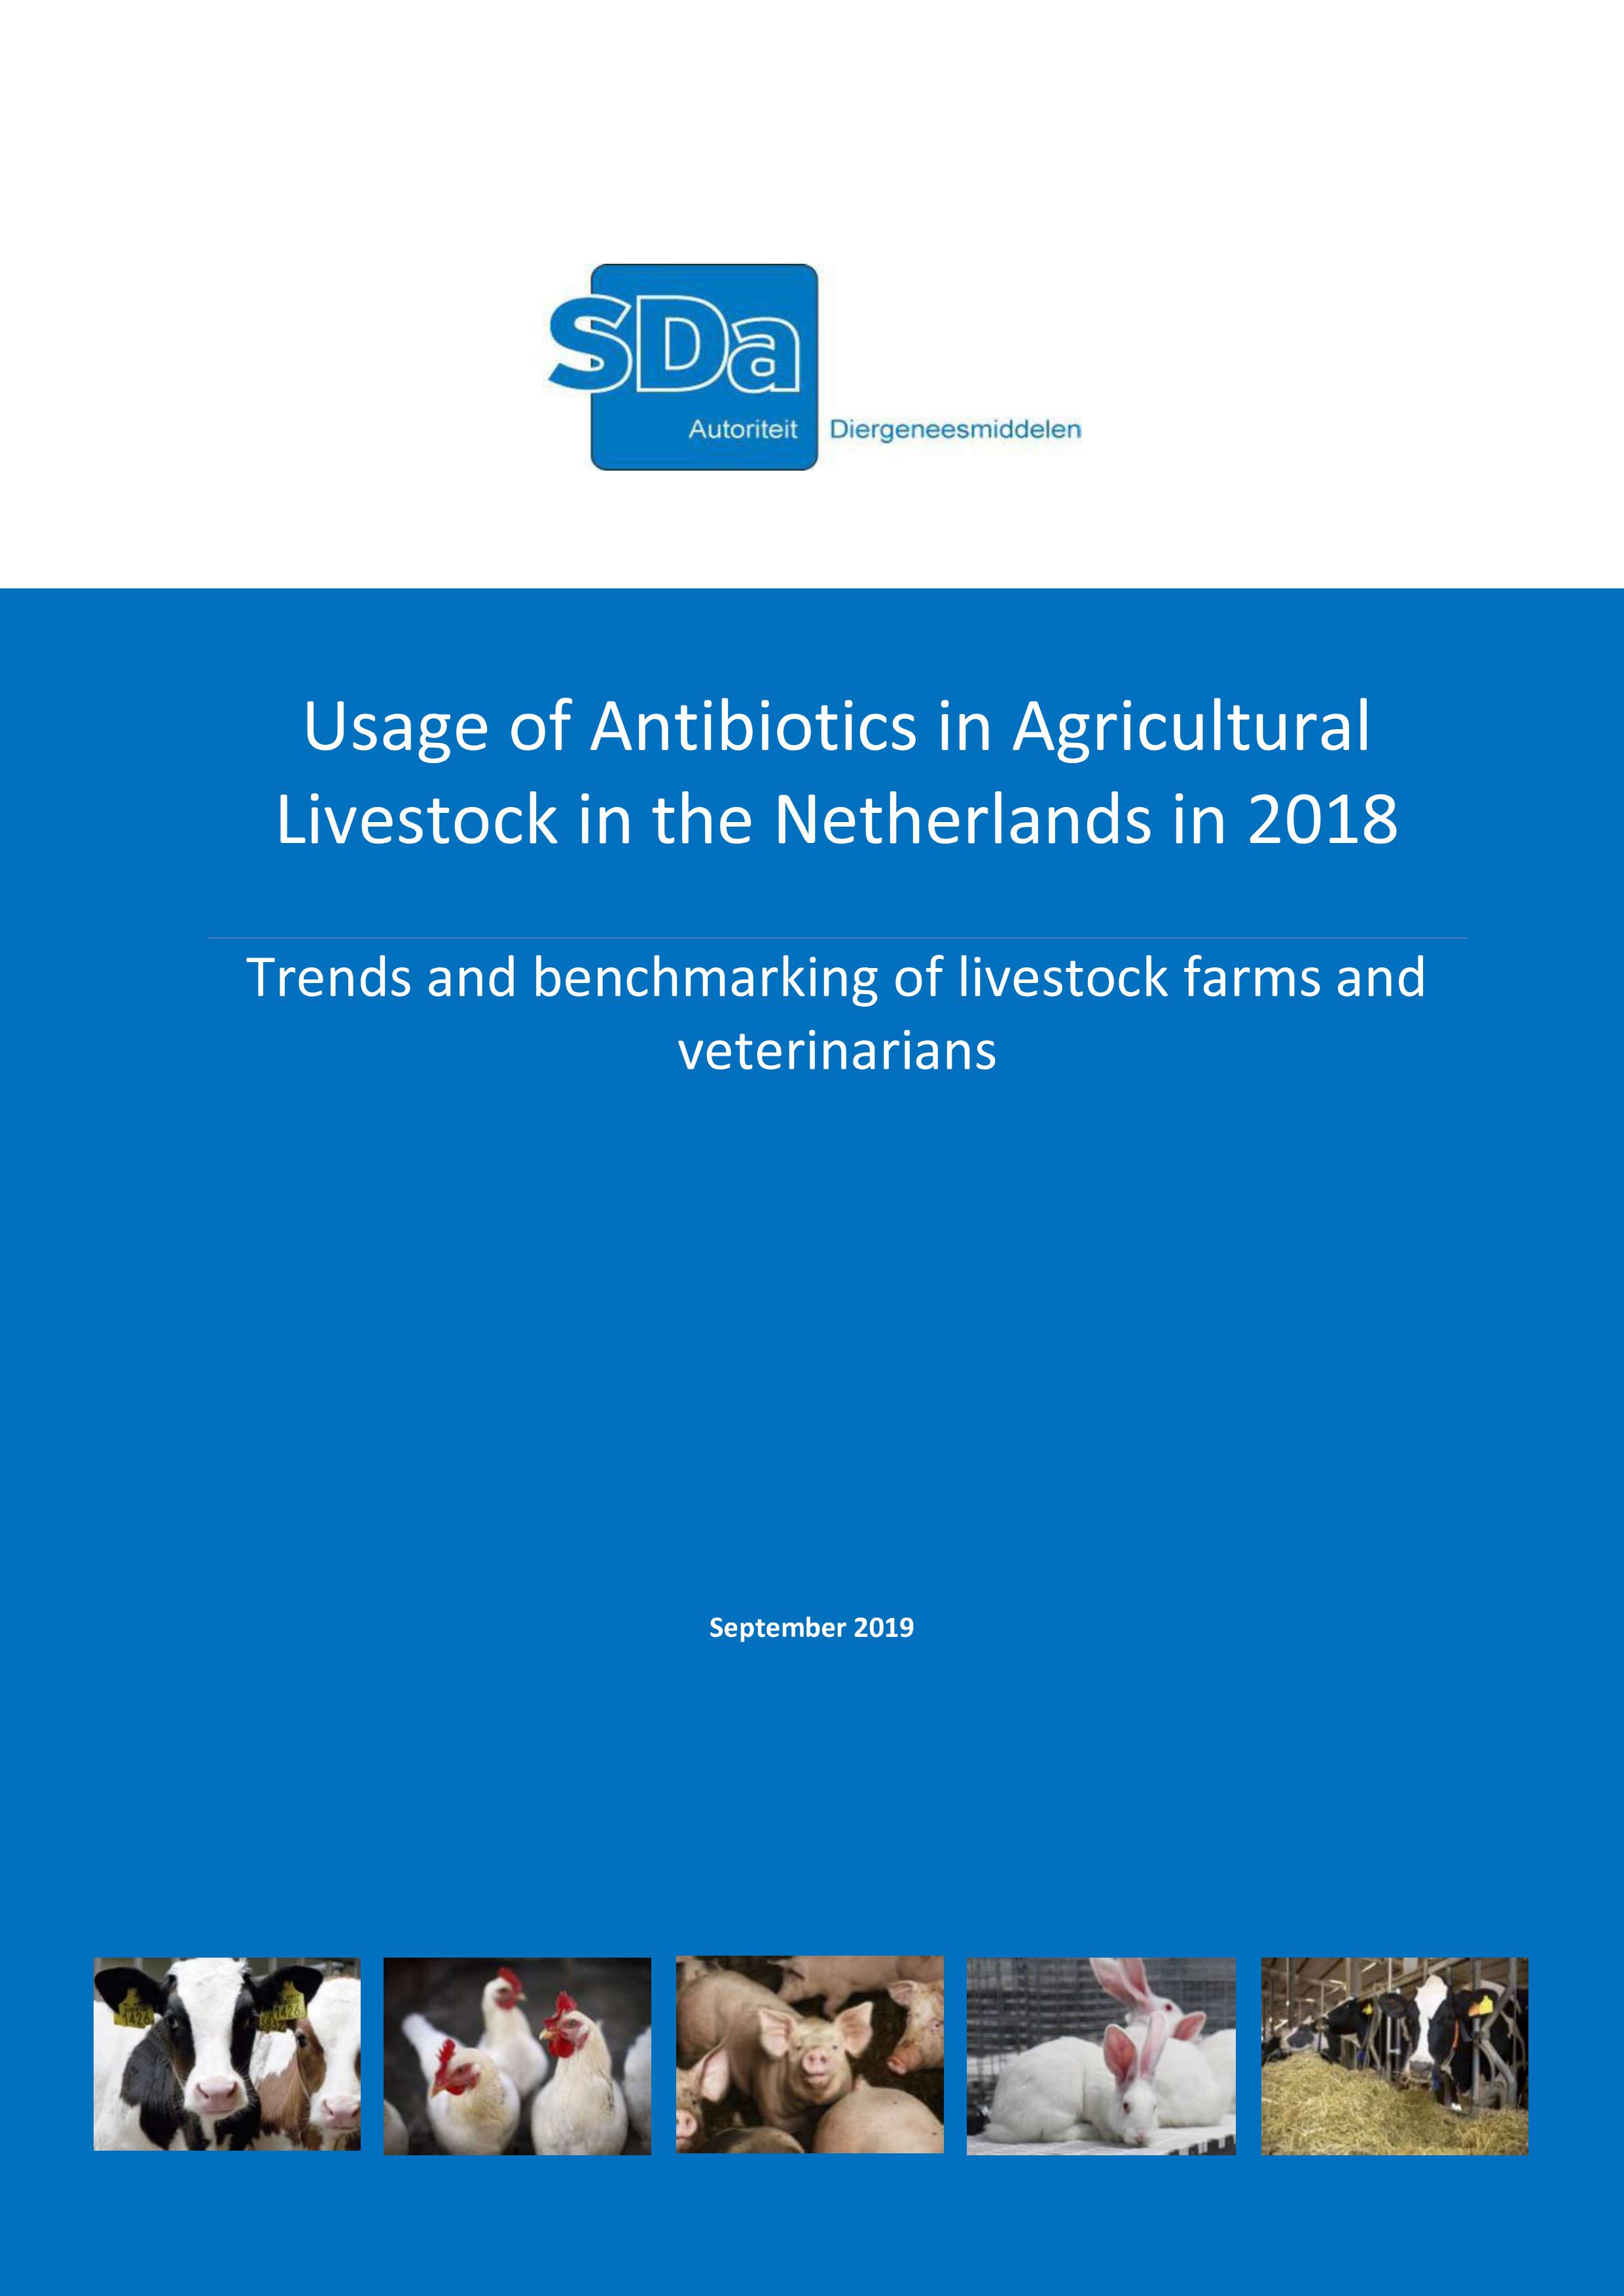  SDa-report ‘Usage of antibiotics in agricultural livestock in the Netherlands in 2018’